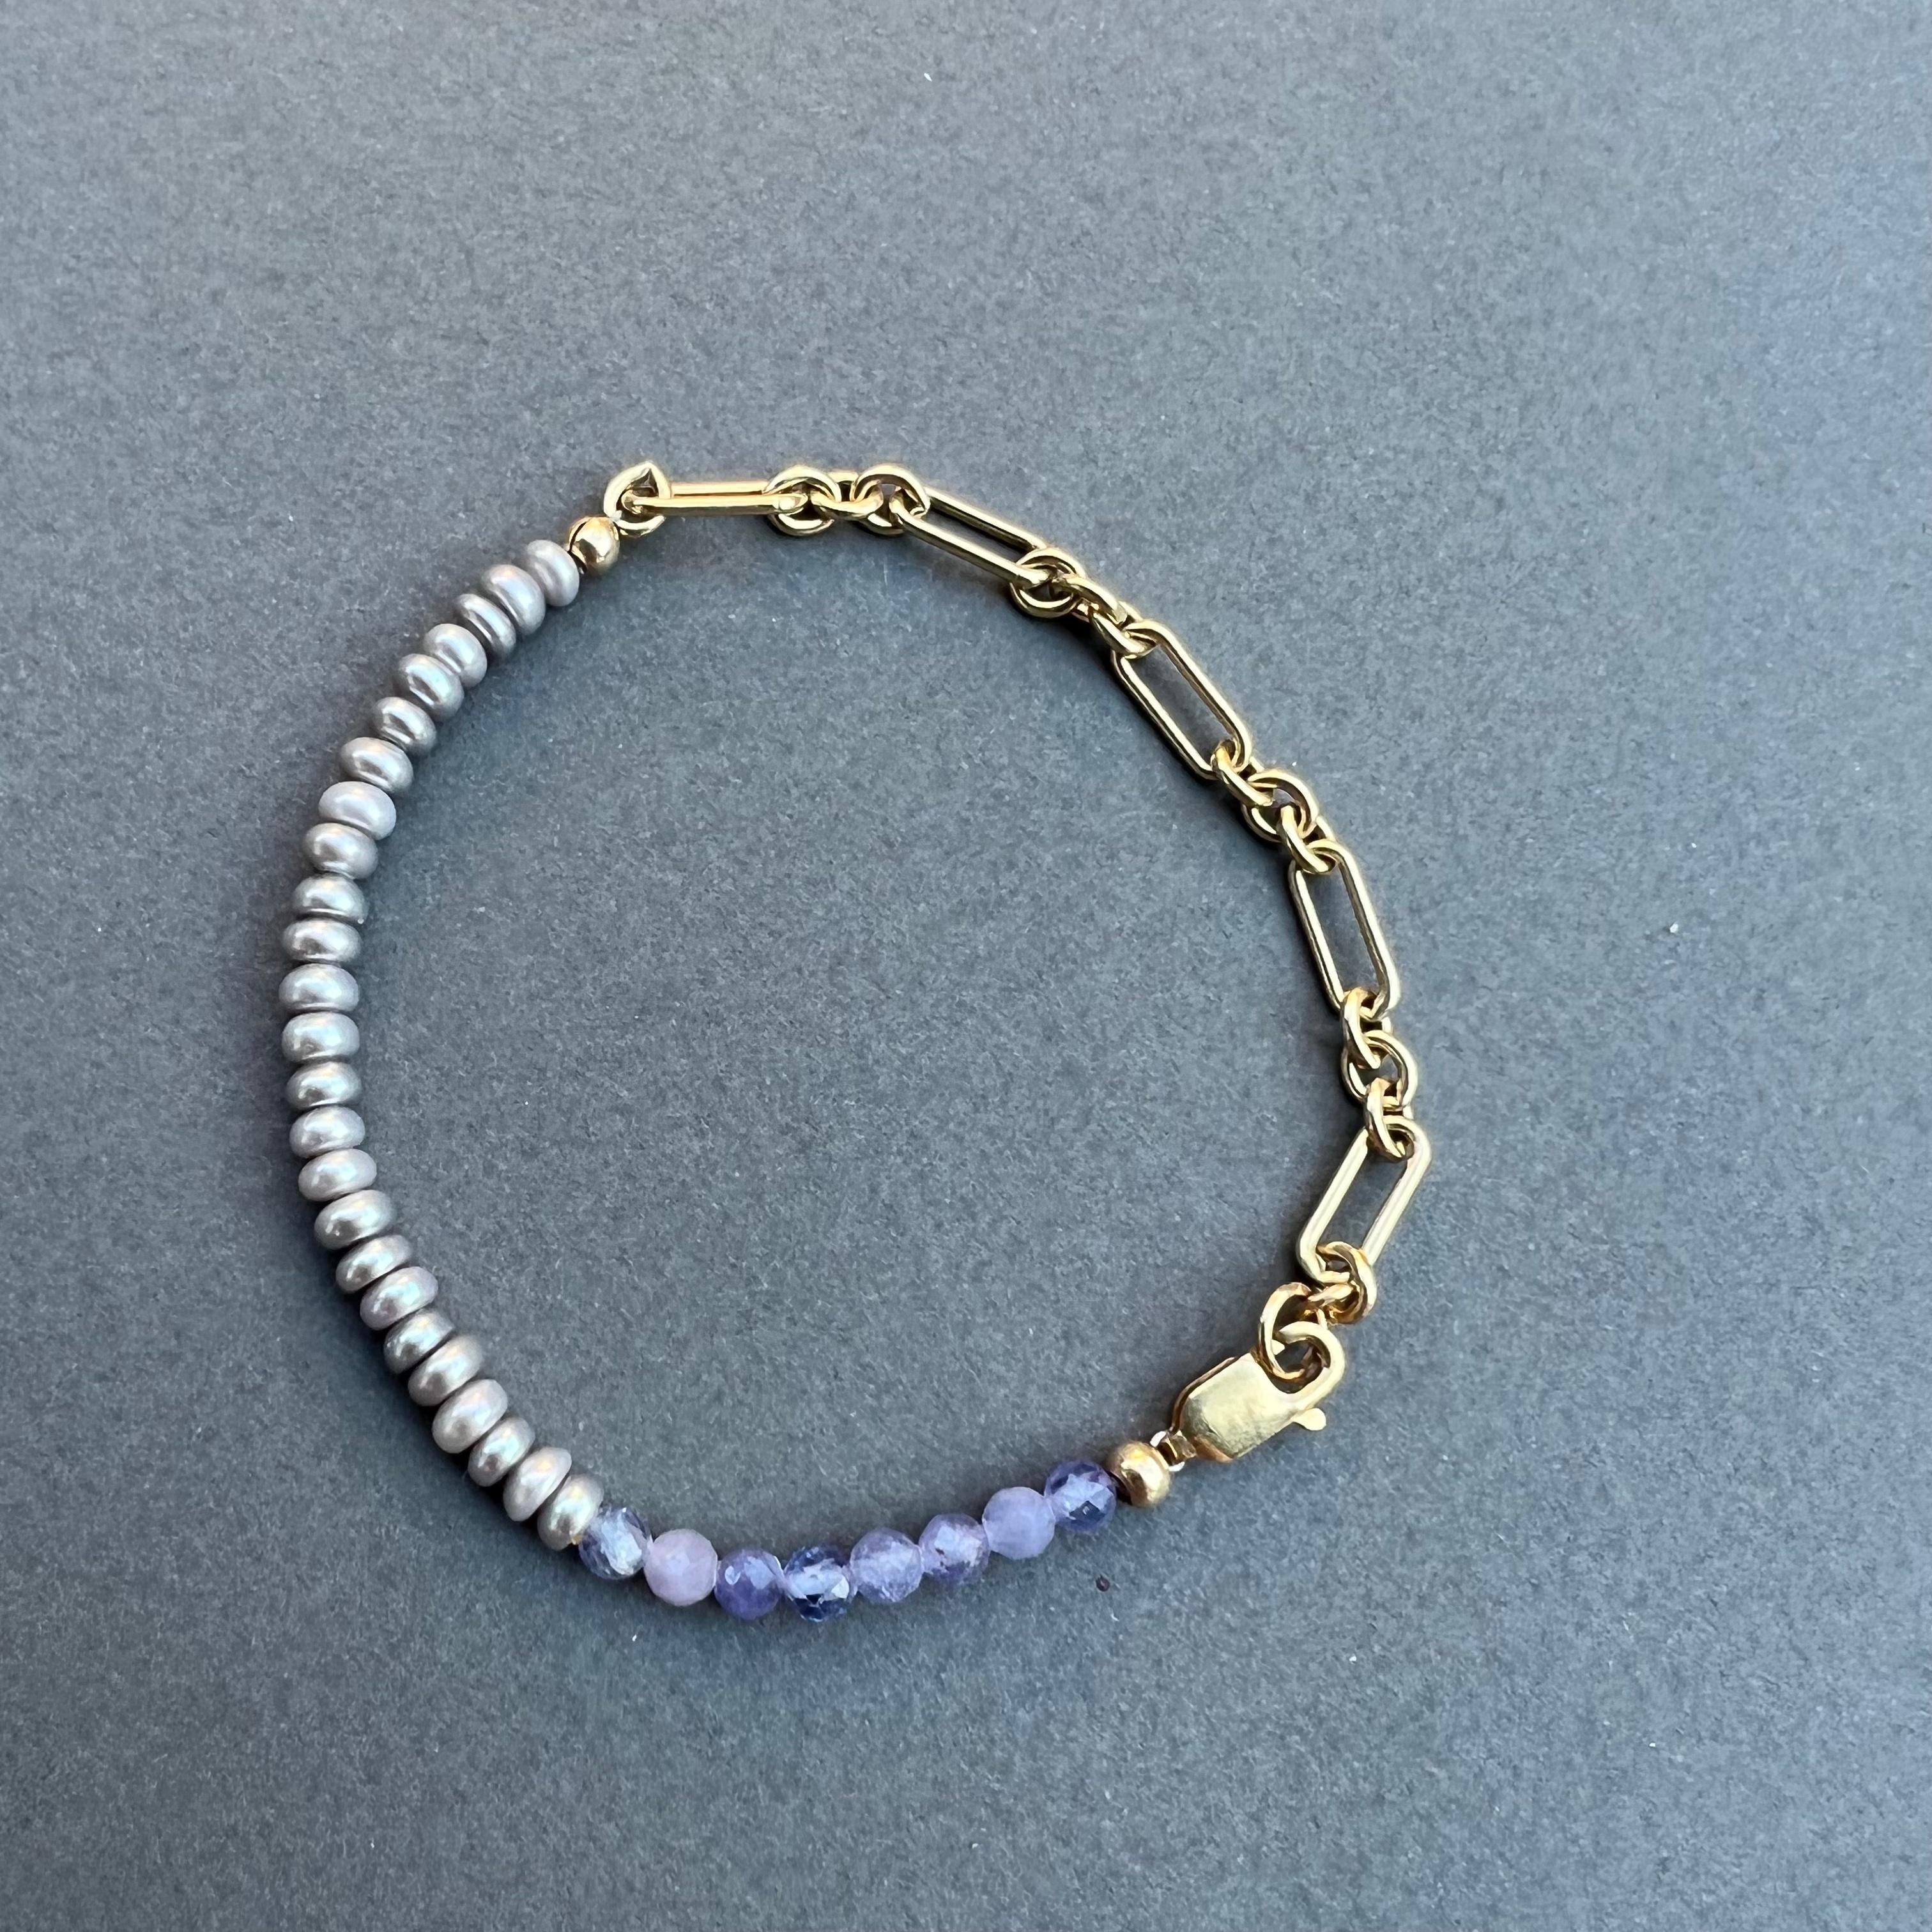 Pearl Tanzanite Ankle Bracelet Beaded Gold Filled Chain J Dauphin 1